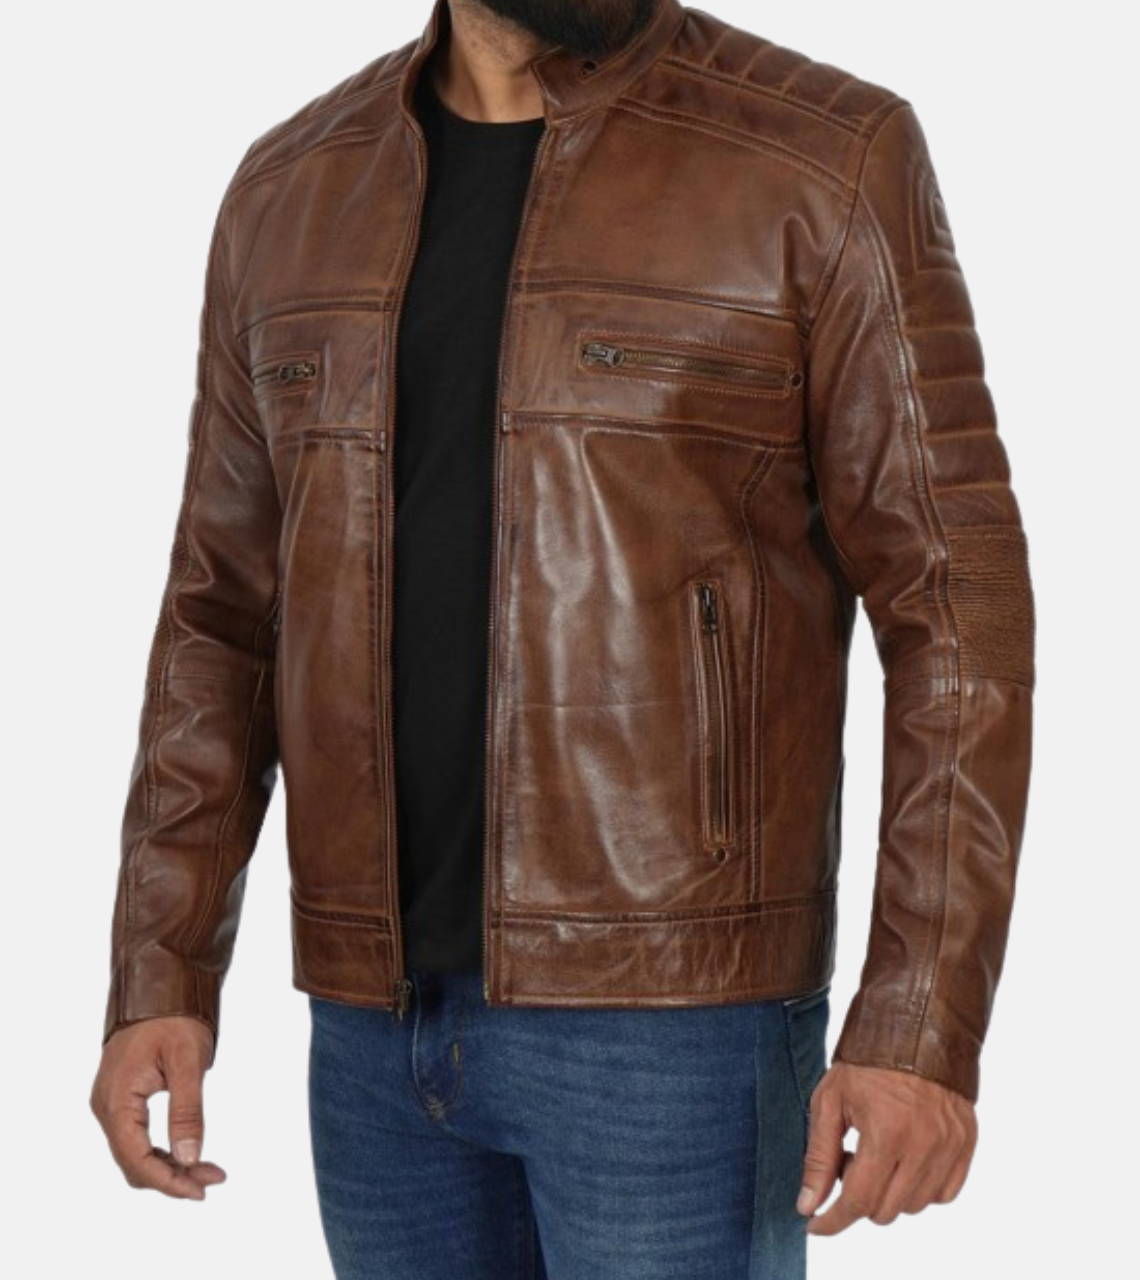 Neato Waxed Leather Jacket For Men's